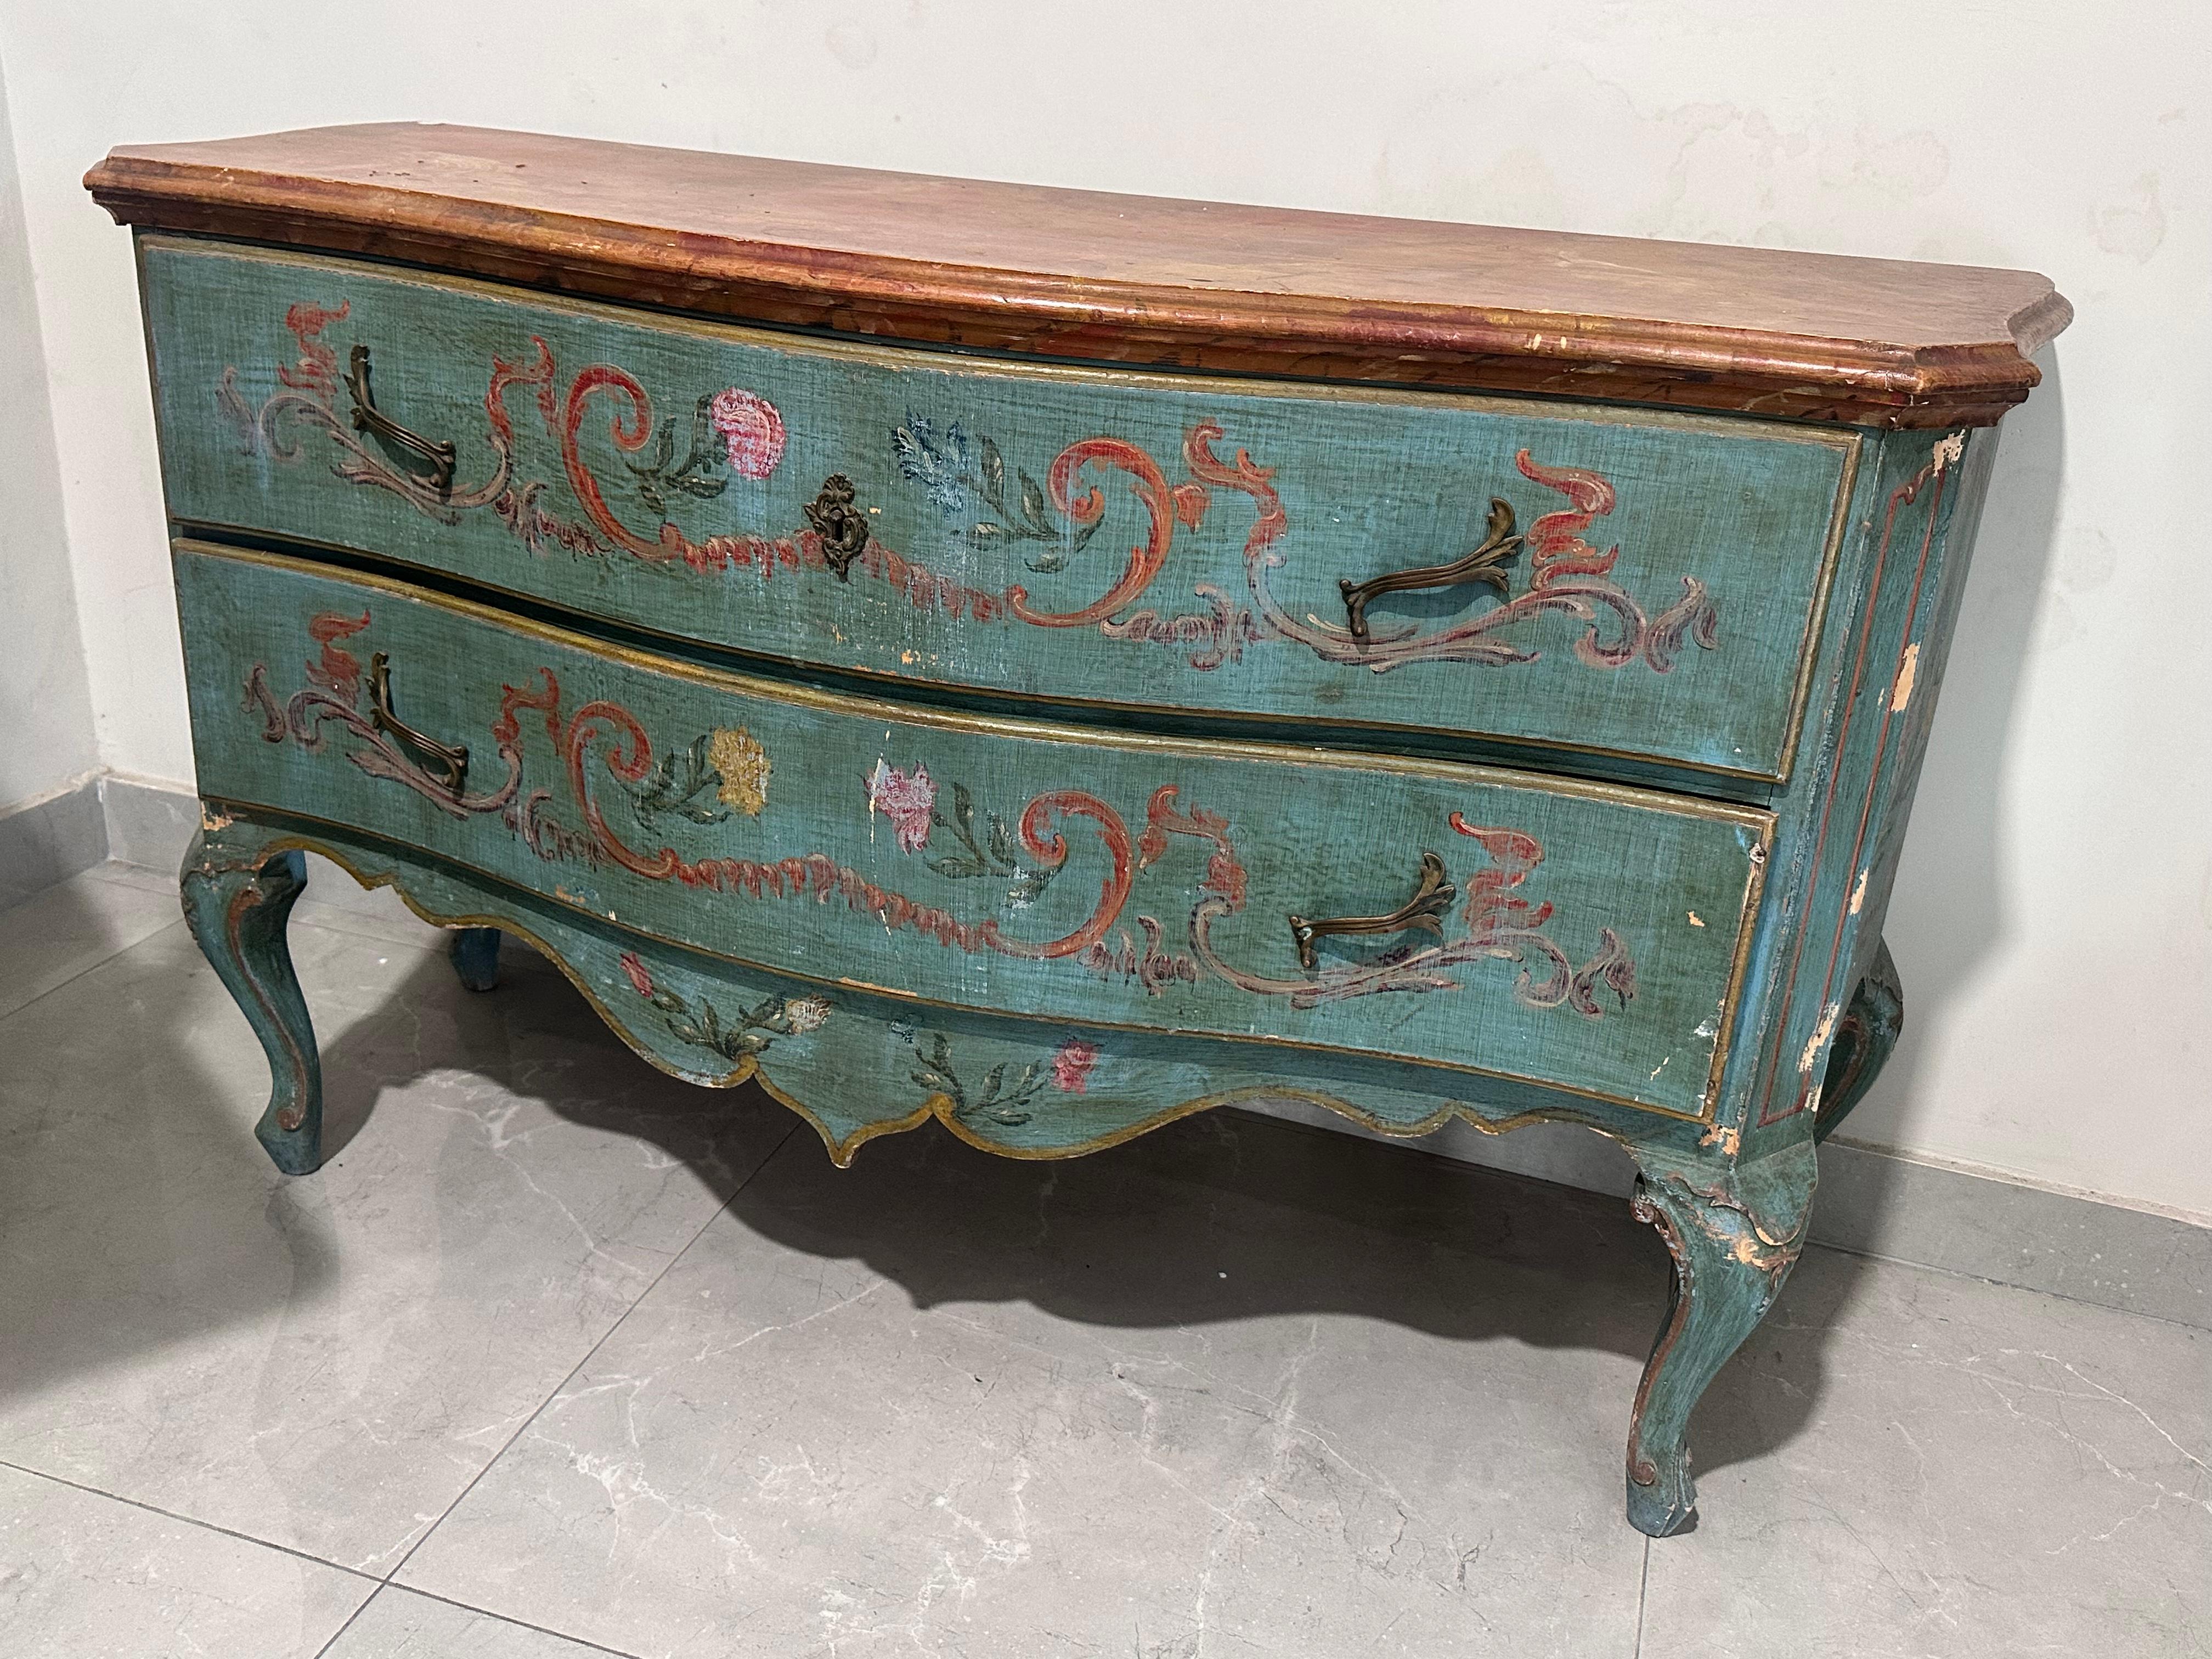 Gorgeous lacquered and painted Como from the early 20th century